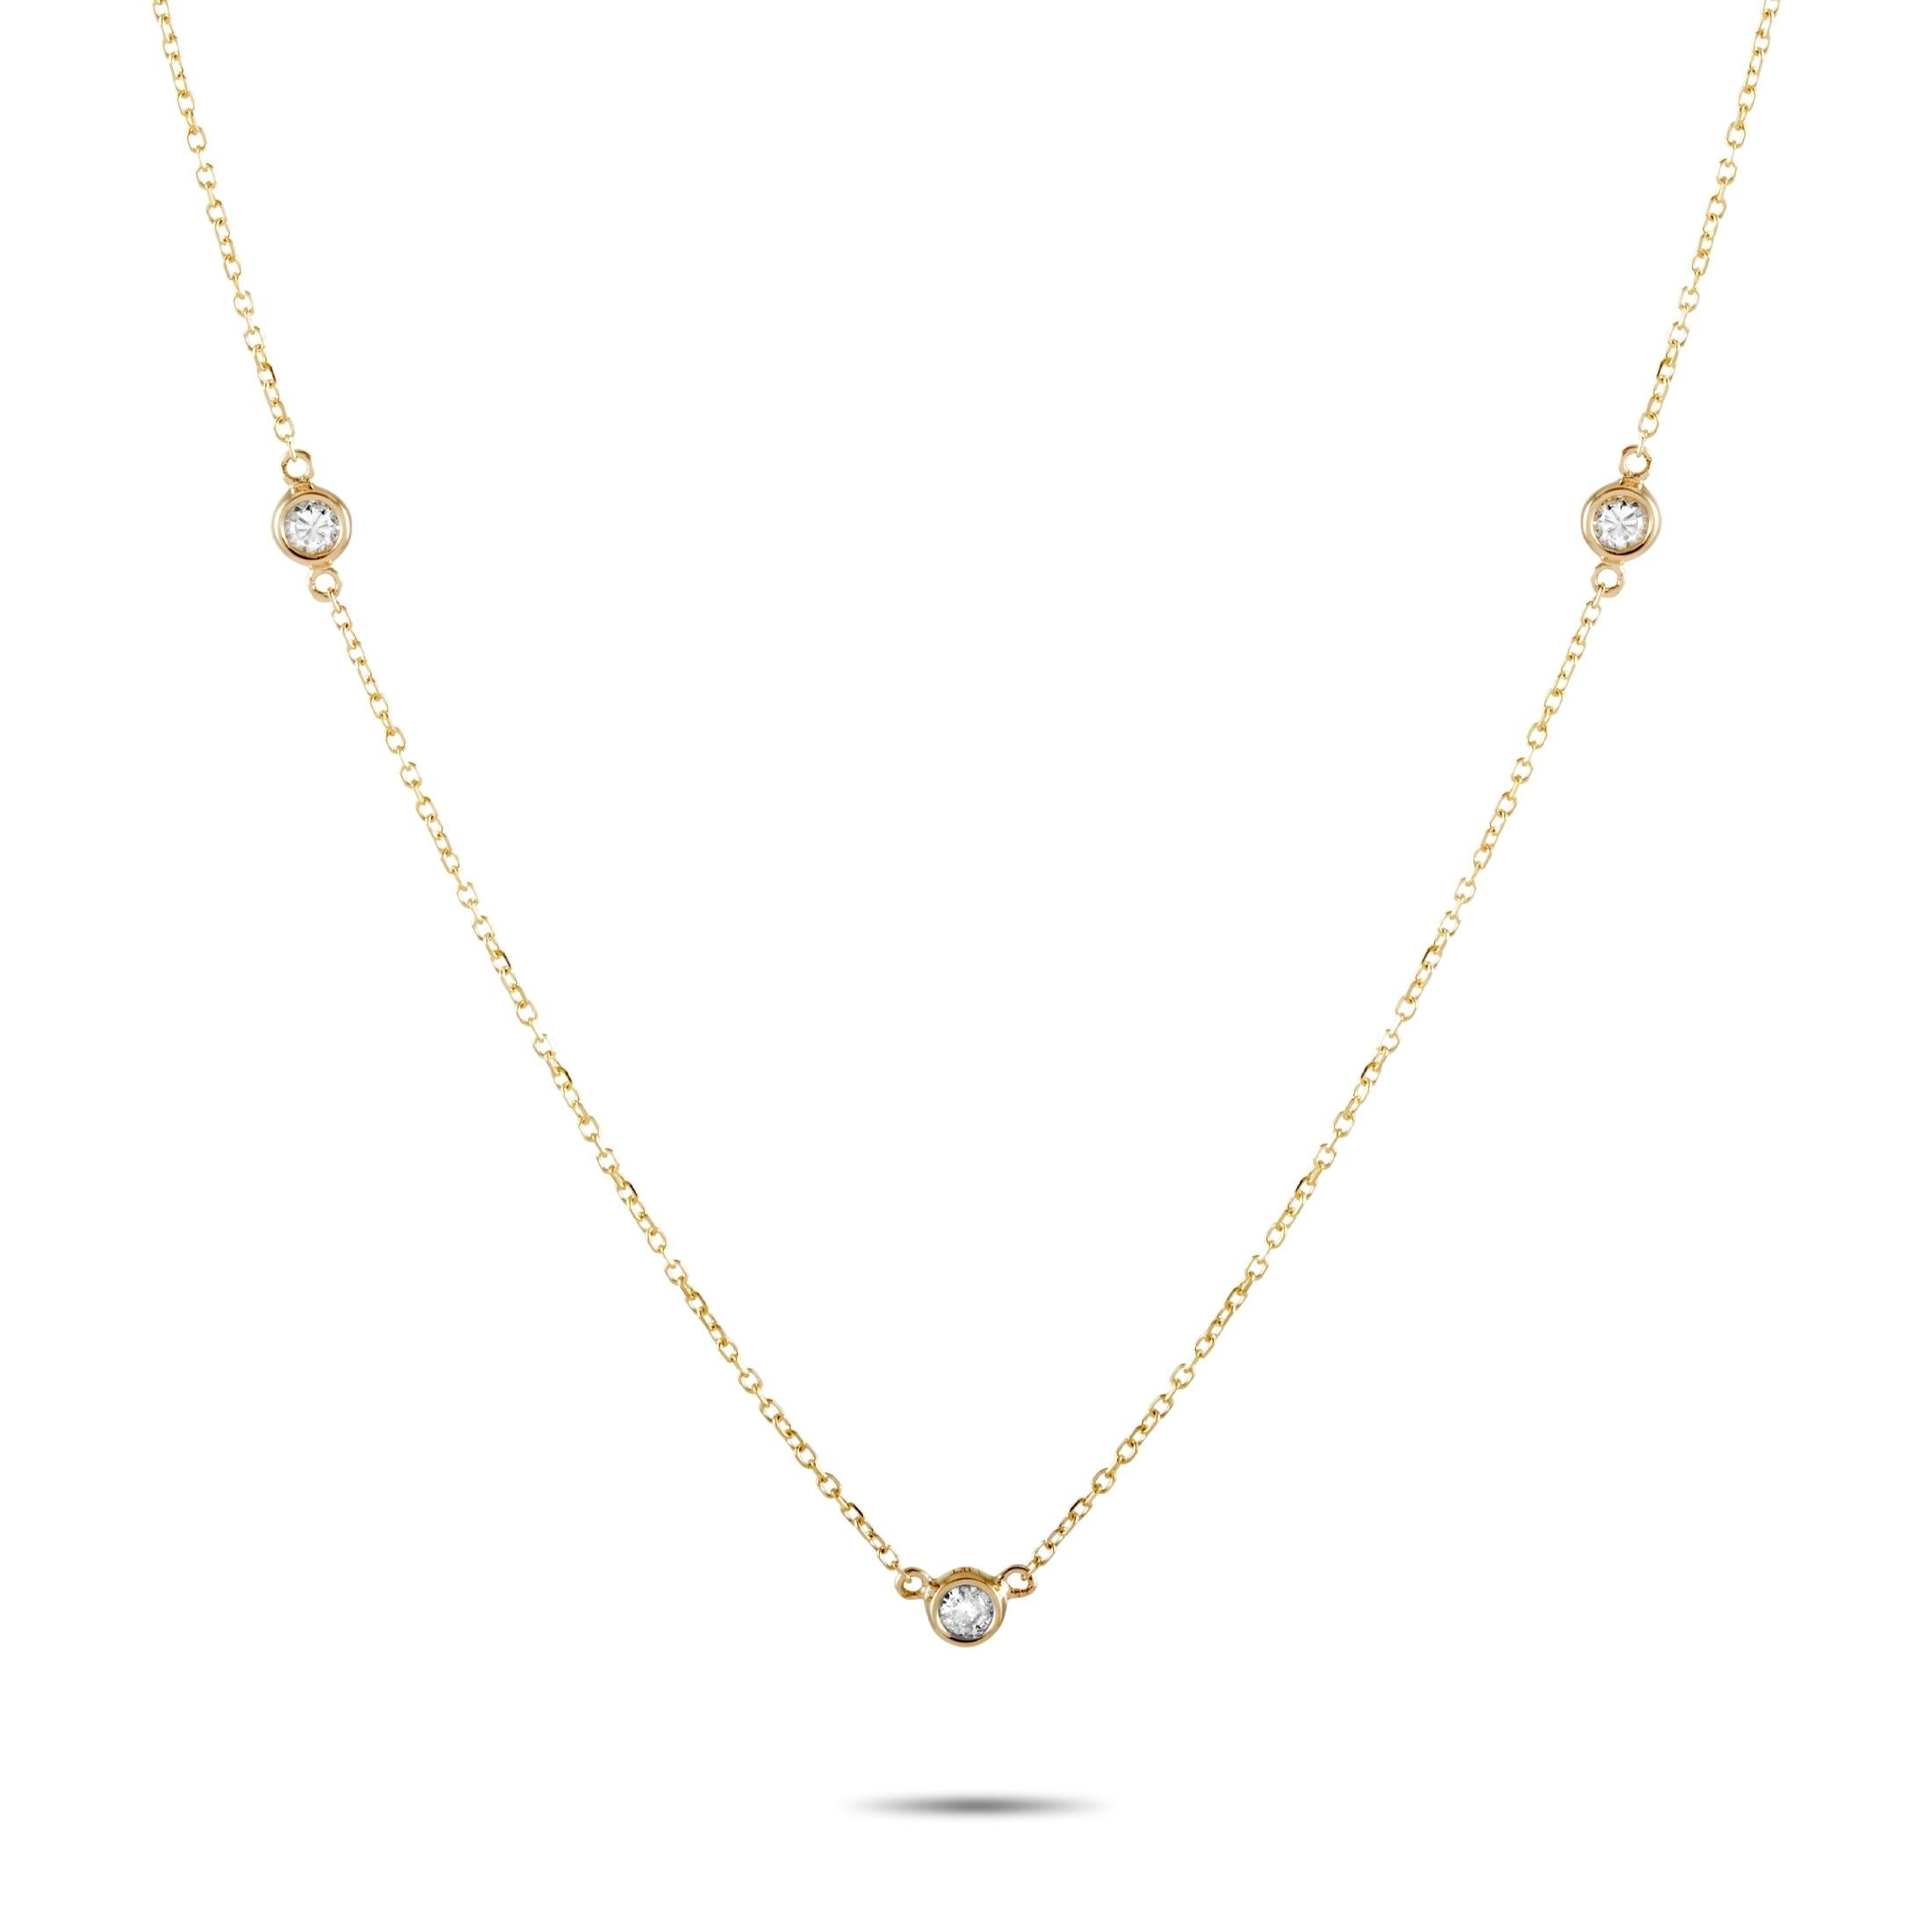 This LB Exclusive necklace is crafted from 14K yellow gold and weighs 1.3 grams, measuring 16” in length. The necklace is set with diamonds that total 0.15 carats.

Offered in brand new condition, this jewelry piece includes a gift box.